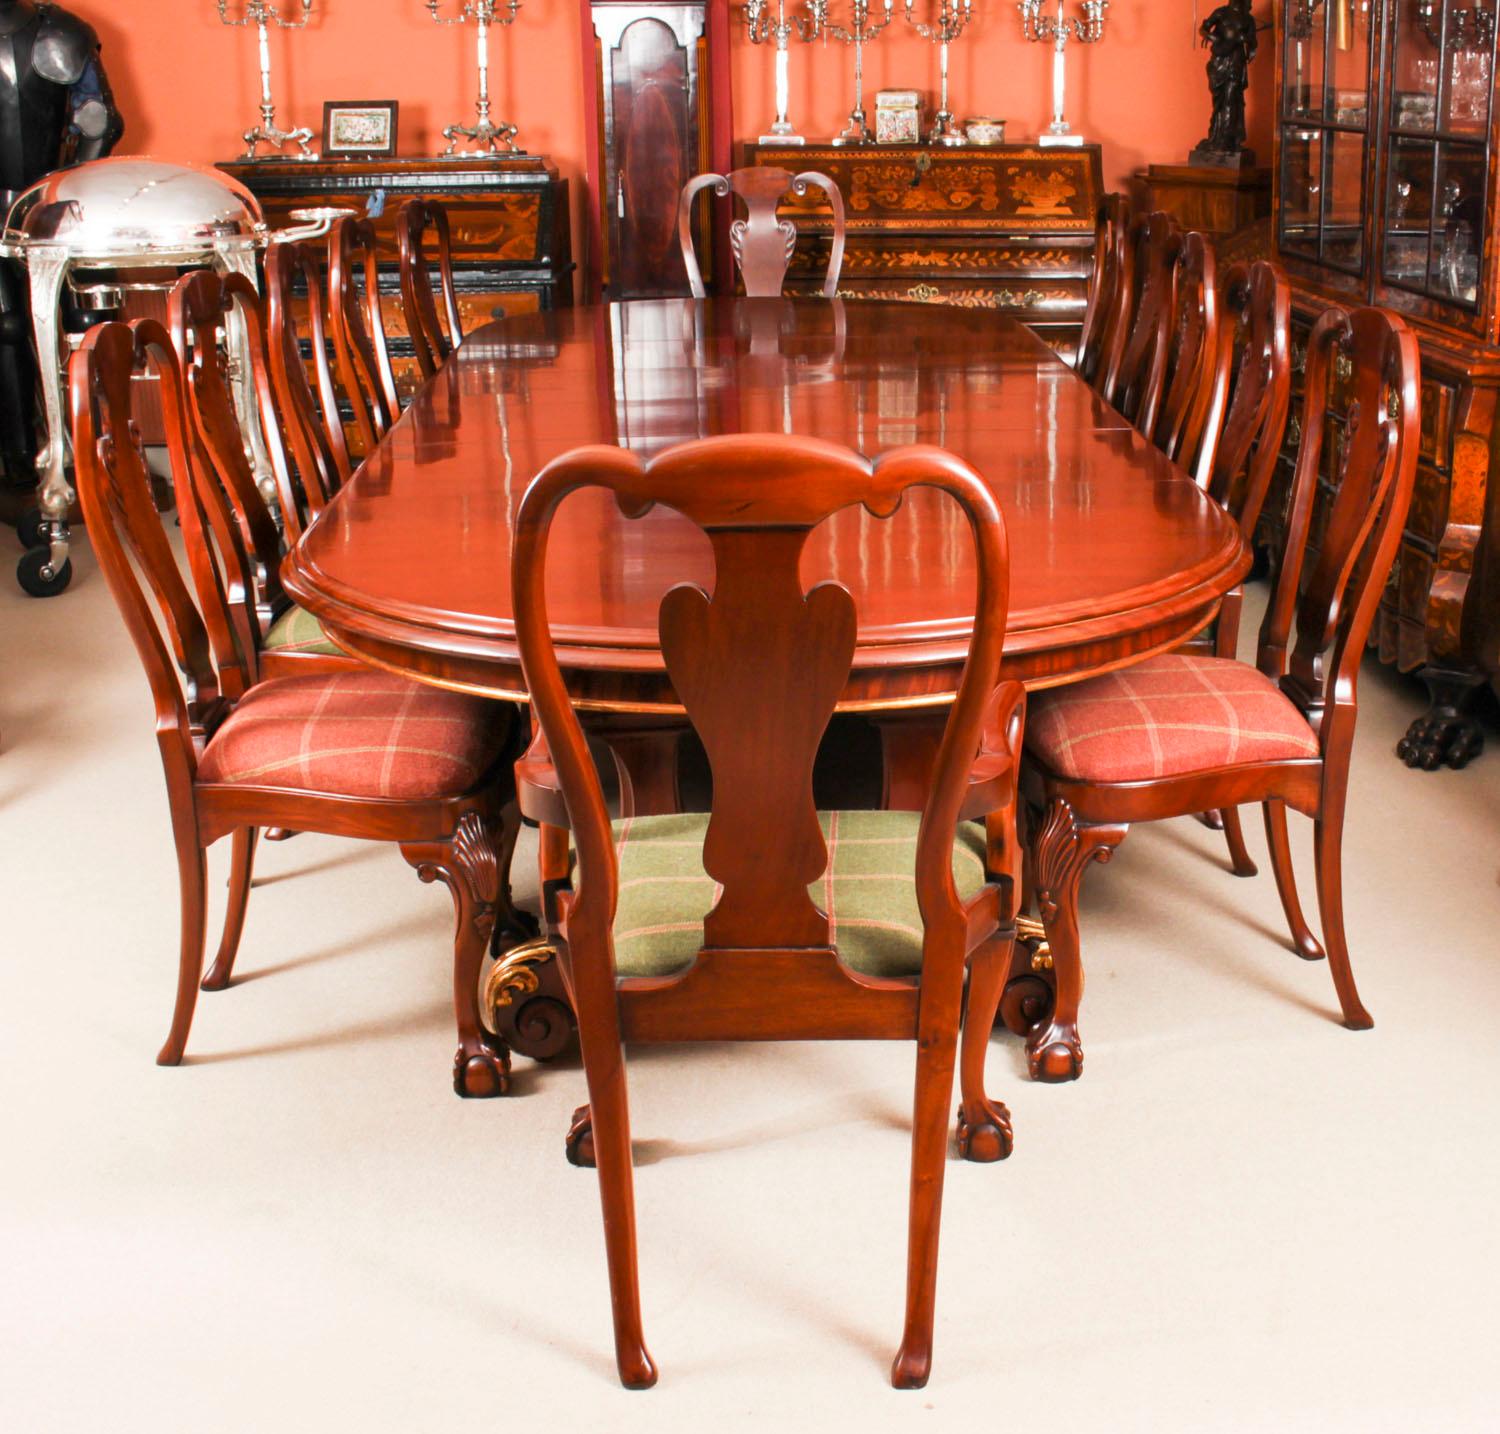 A fantastic antique Victorian dining set comprising an antique Victorian mahogany and gilded twin pedestal base dining table by the renowned Glasgow cabinet maker and retailer Wylie & Lochhead, Circa 1850 in date and a set of twelve Queen Anne